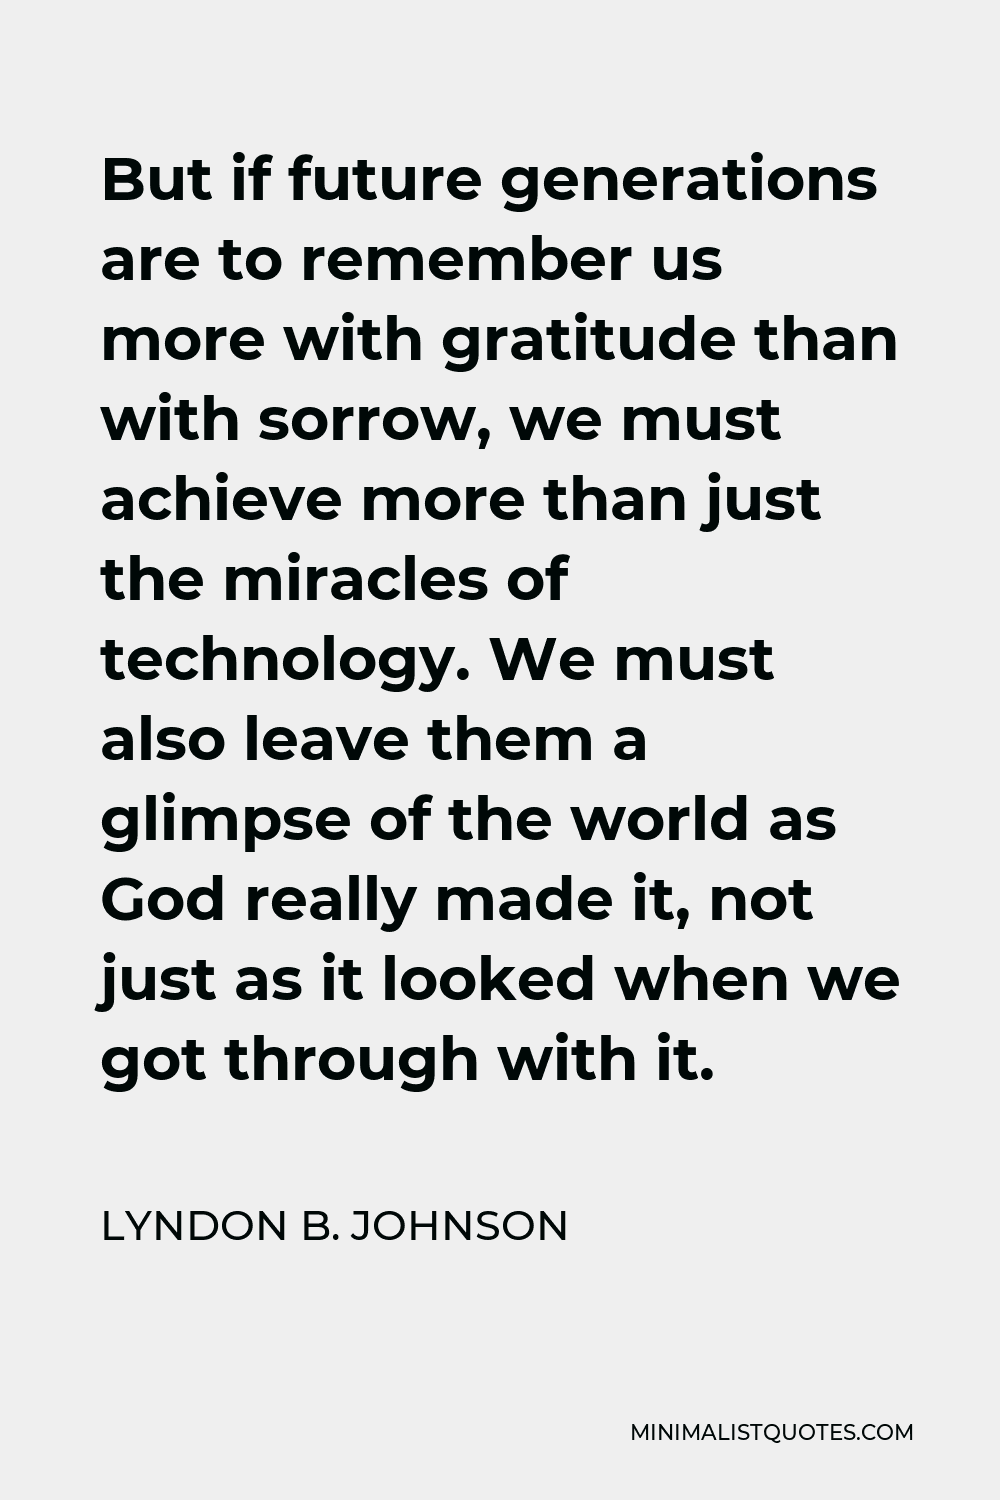 Lyndon B. Johnson Quote - But if future generations are to remember us more with gratitude than with sorrow, we must achieve more than just the miracles of technology. We must also leave them a glimpse of the world as God really made it, not just as it looked when we got through with it.